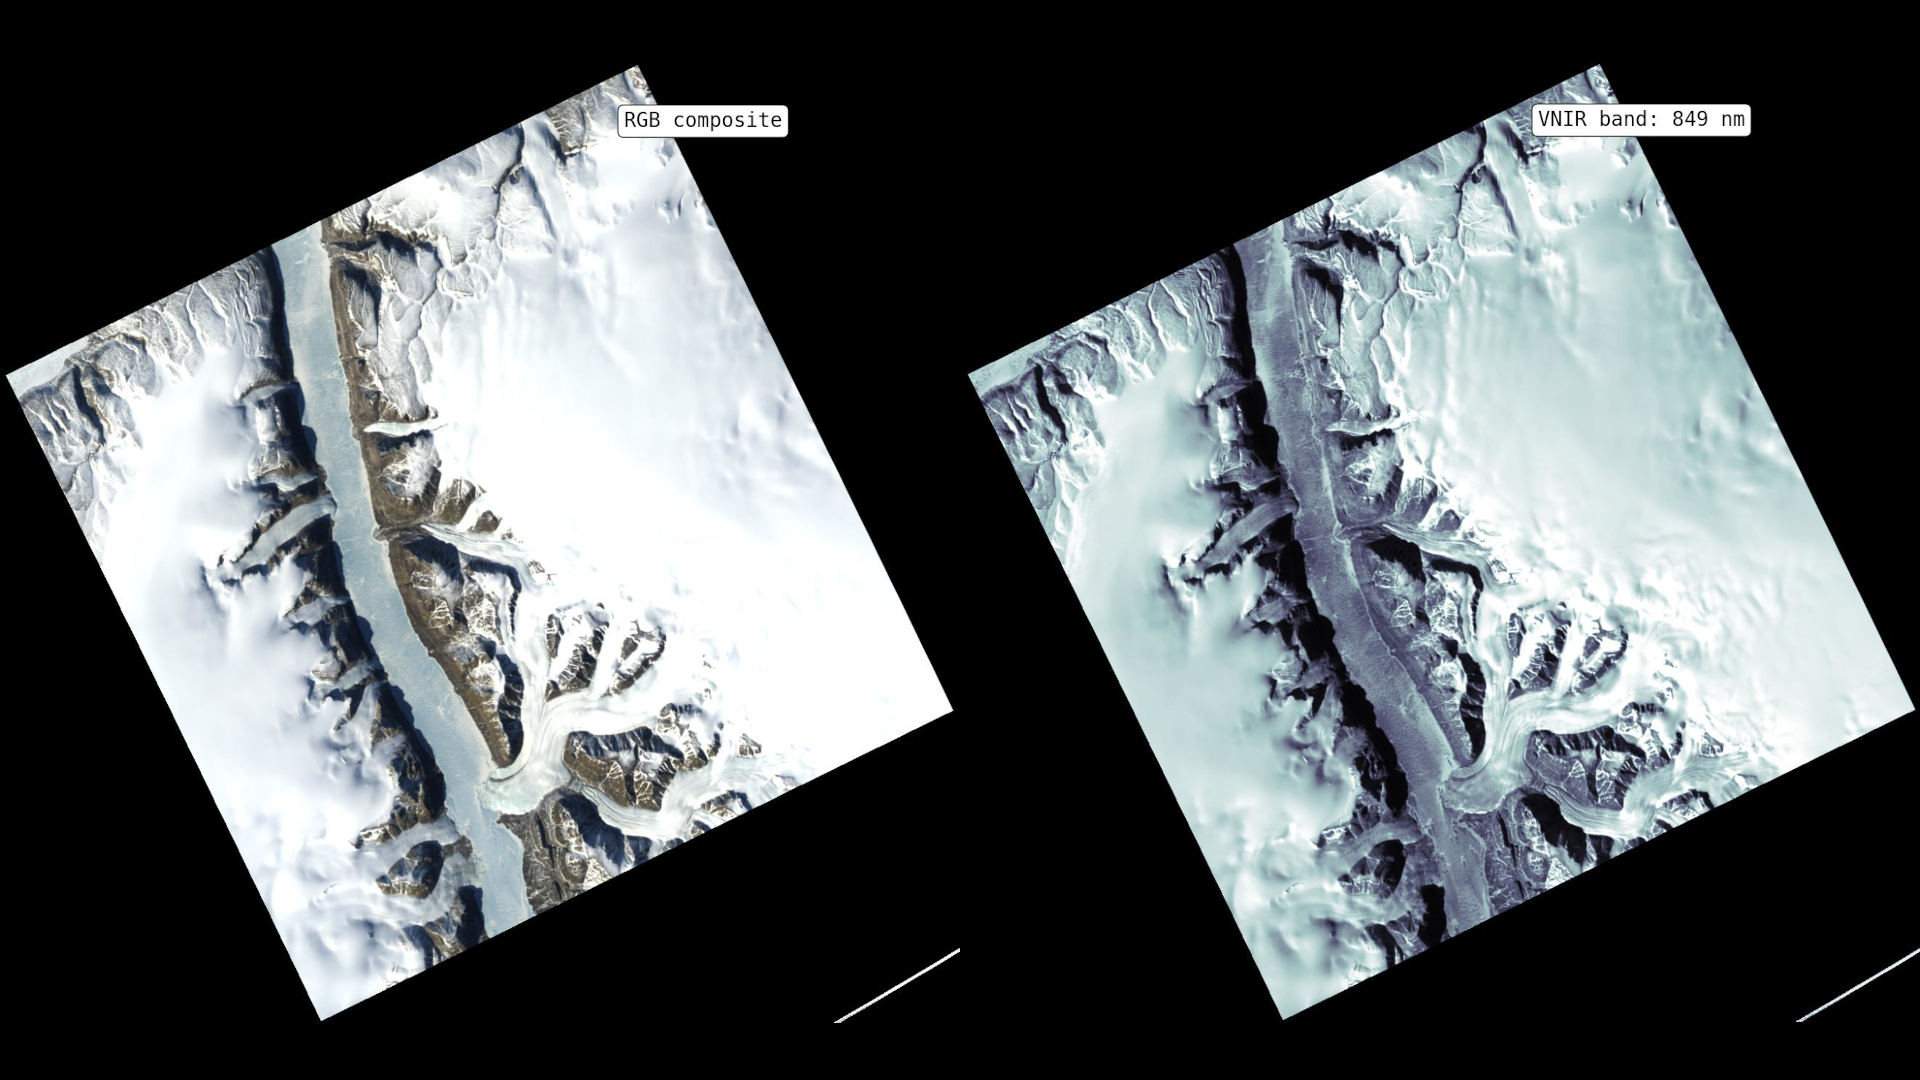 ASI - The fjords of Greenland observed by PRISMA